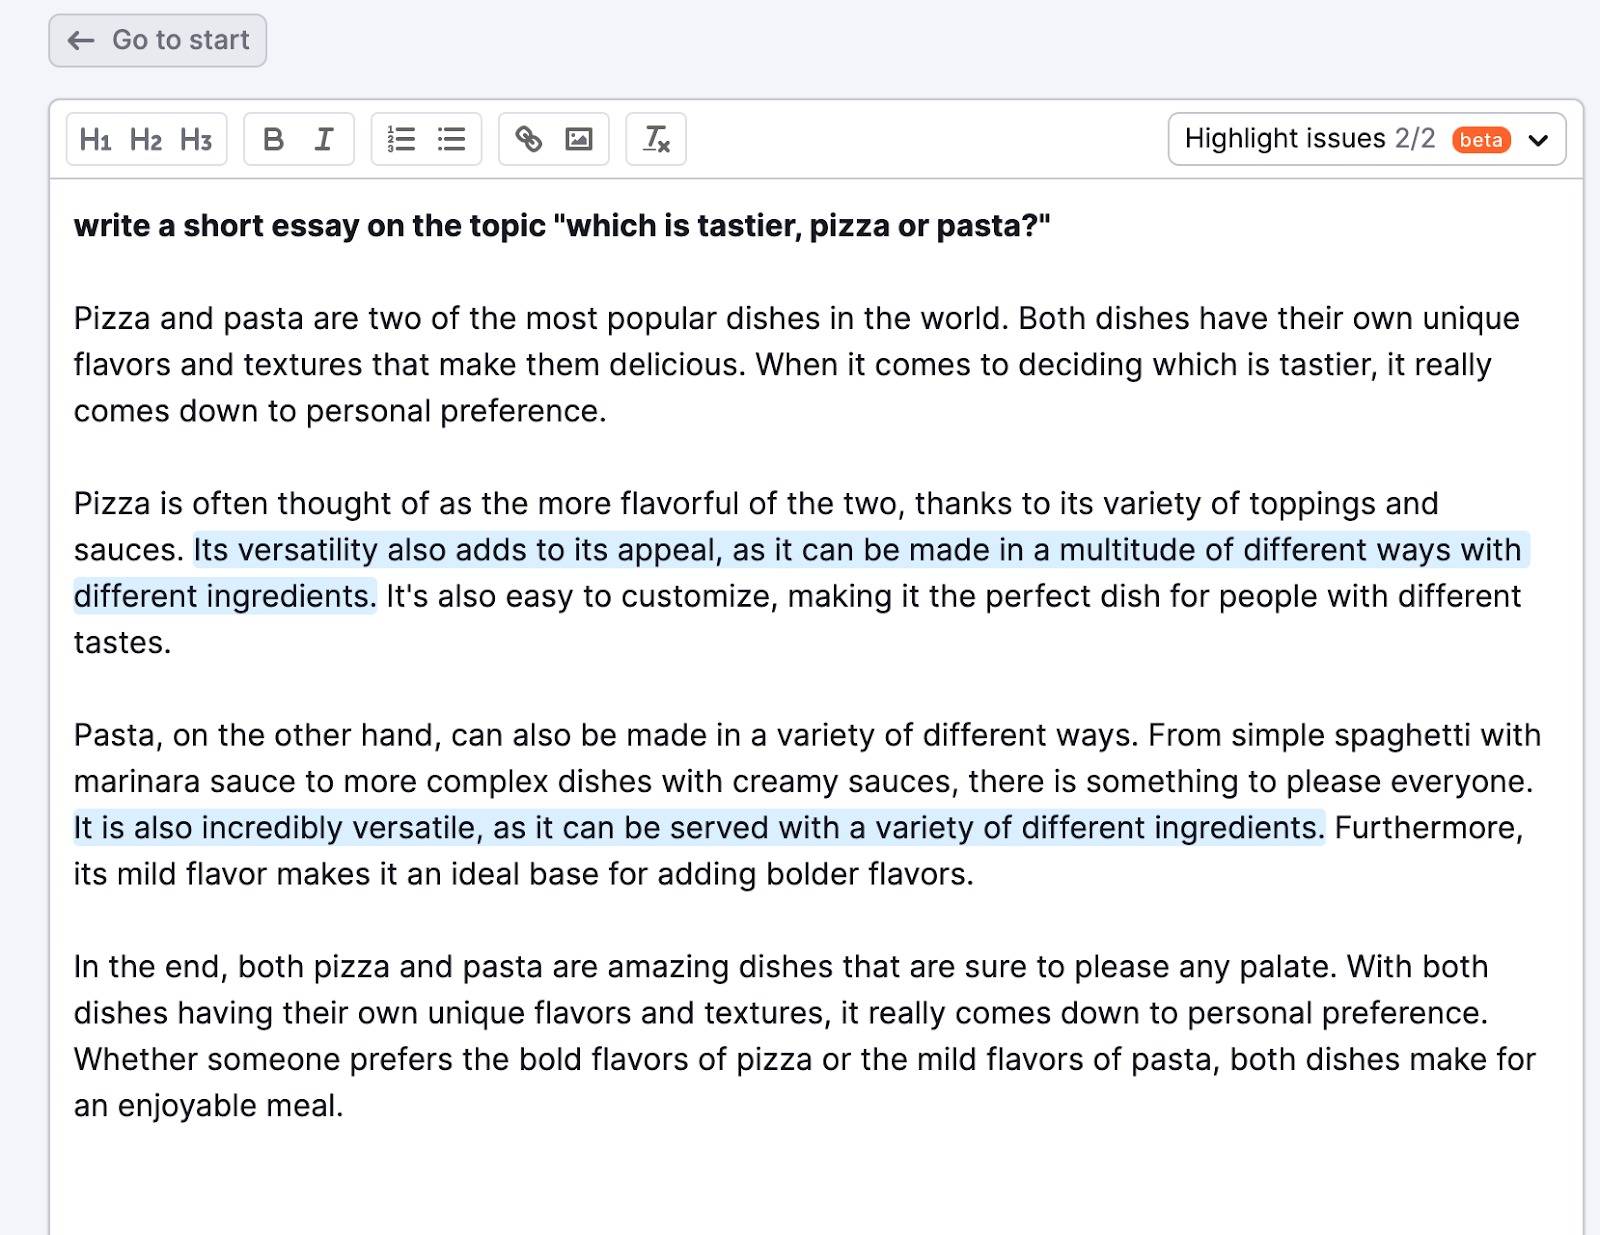 Example of the Compose with AI feature. In this example, the user asks the tool to "write a short essay on the topic "which is tastier, pizza or pasta?". The tool then replies with four paragraphs on the topic. 